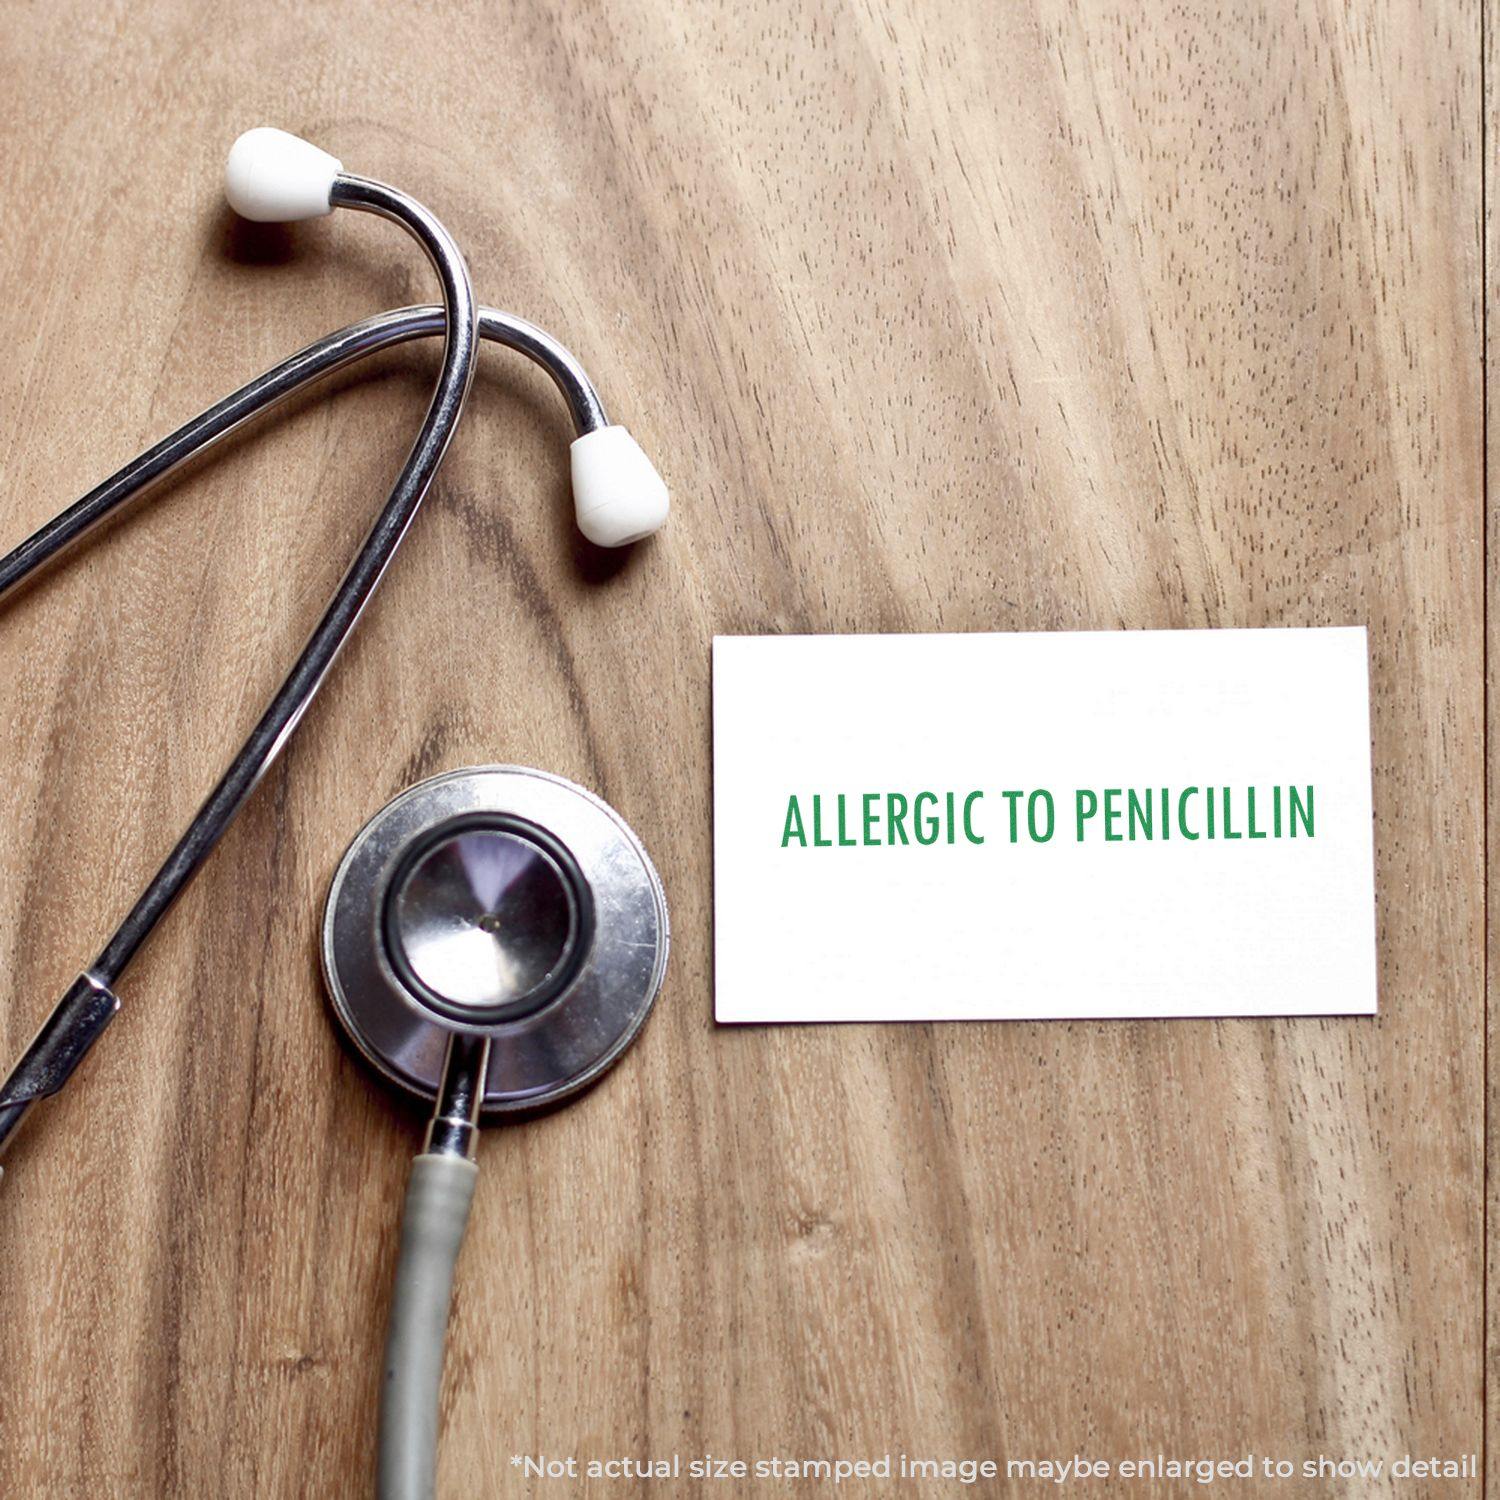 A stock office pre-inked stamp with a stamped image showing how the text "ALLERGIC TO PENICILLIN" is displayed after stamping.